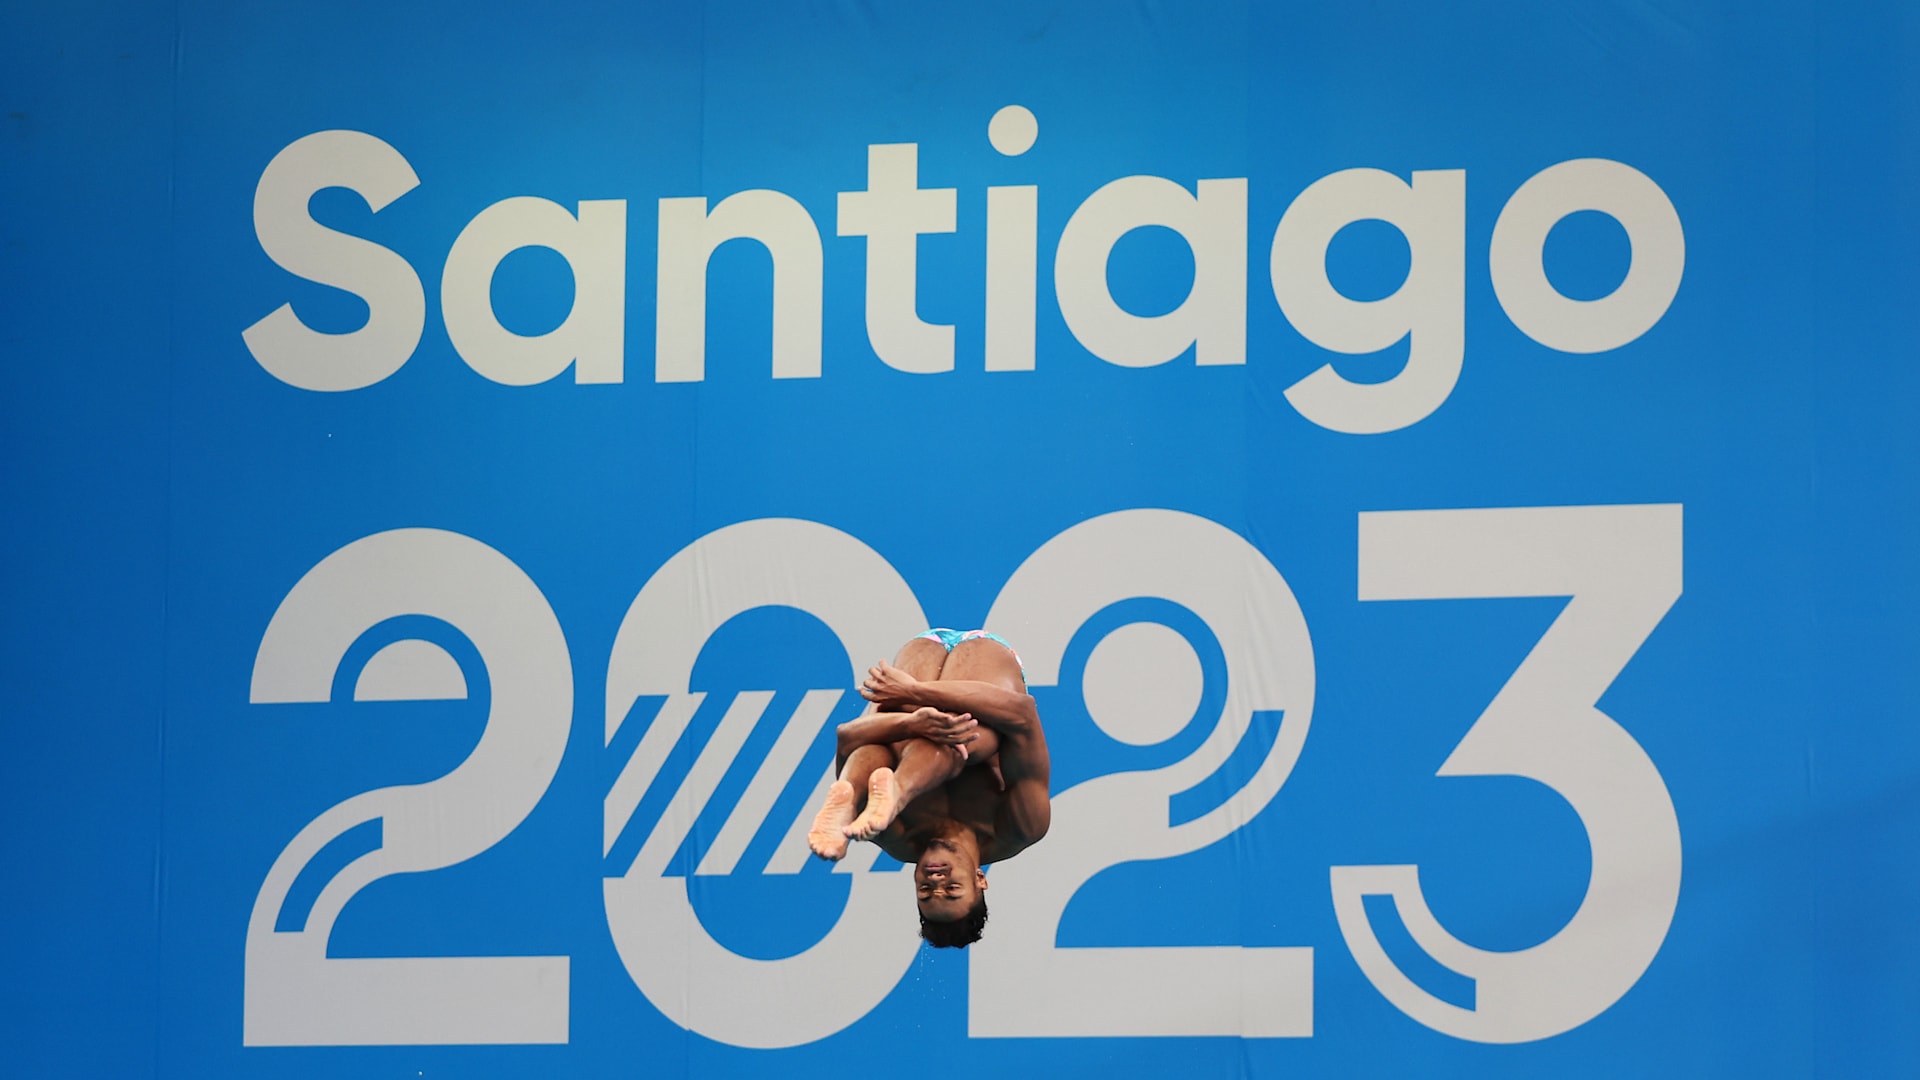 Pan American Games Santiago 2023: Midea Carrier will air weather stages